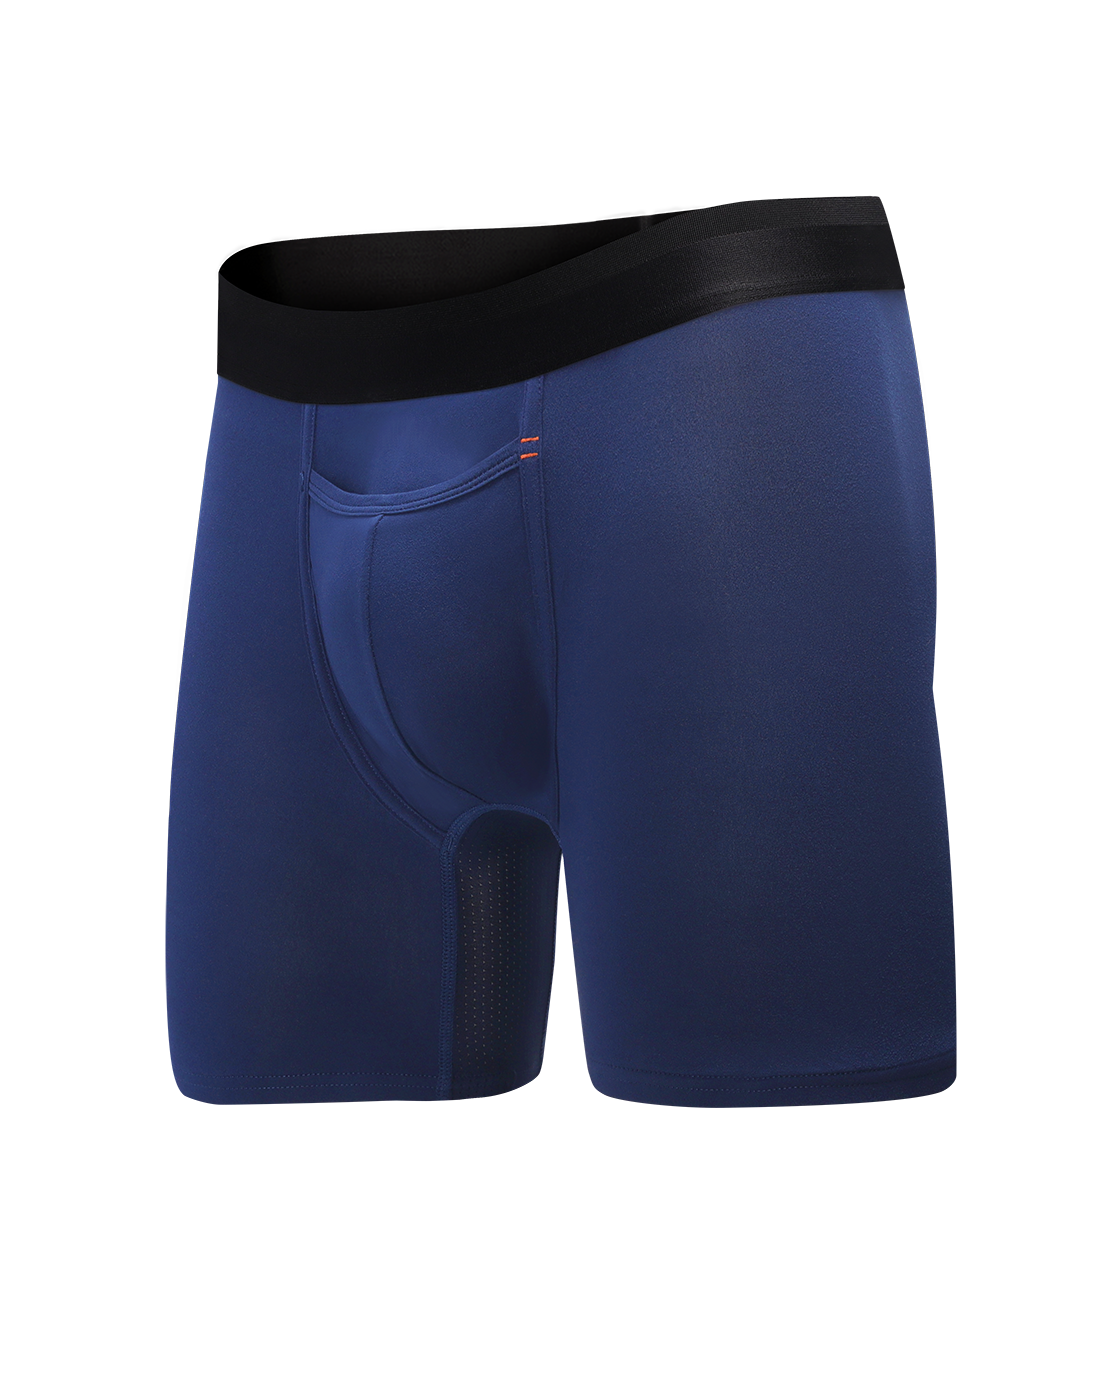 The Best Underwear for Athletic Activities and Daily Use - Cliché Magazine